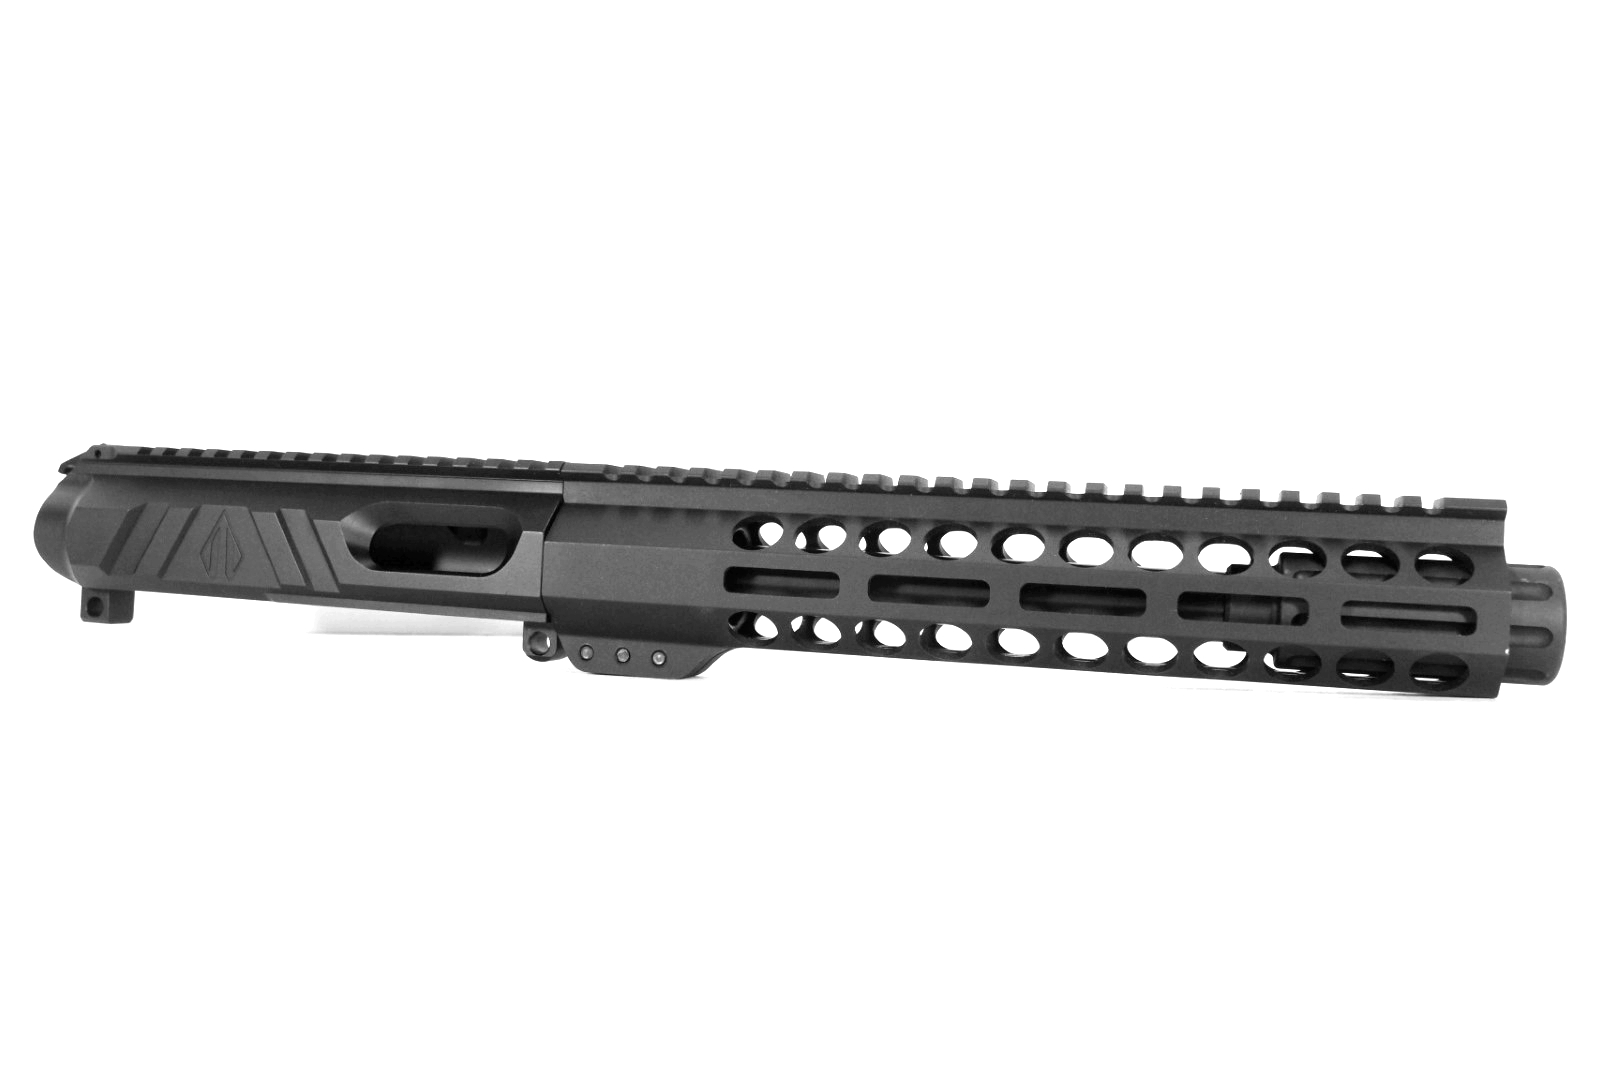 PRO2A 8.5" 40 S&W 1/16 Pistol Caliber NR Side Charging Melonite M-LOK Upper with Flash Can